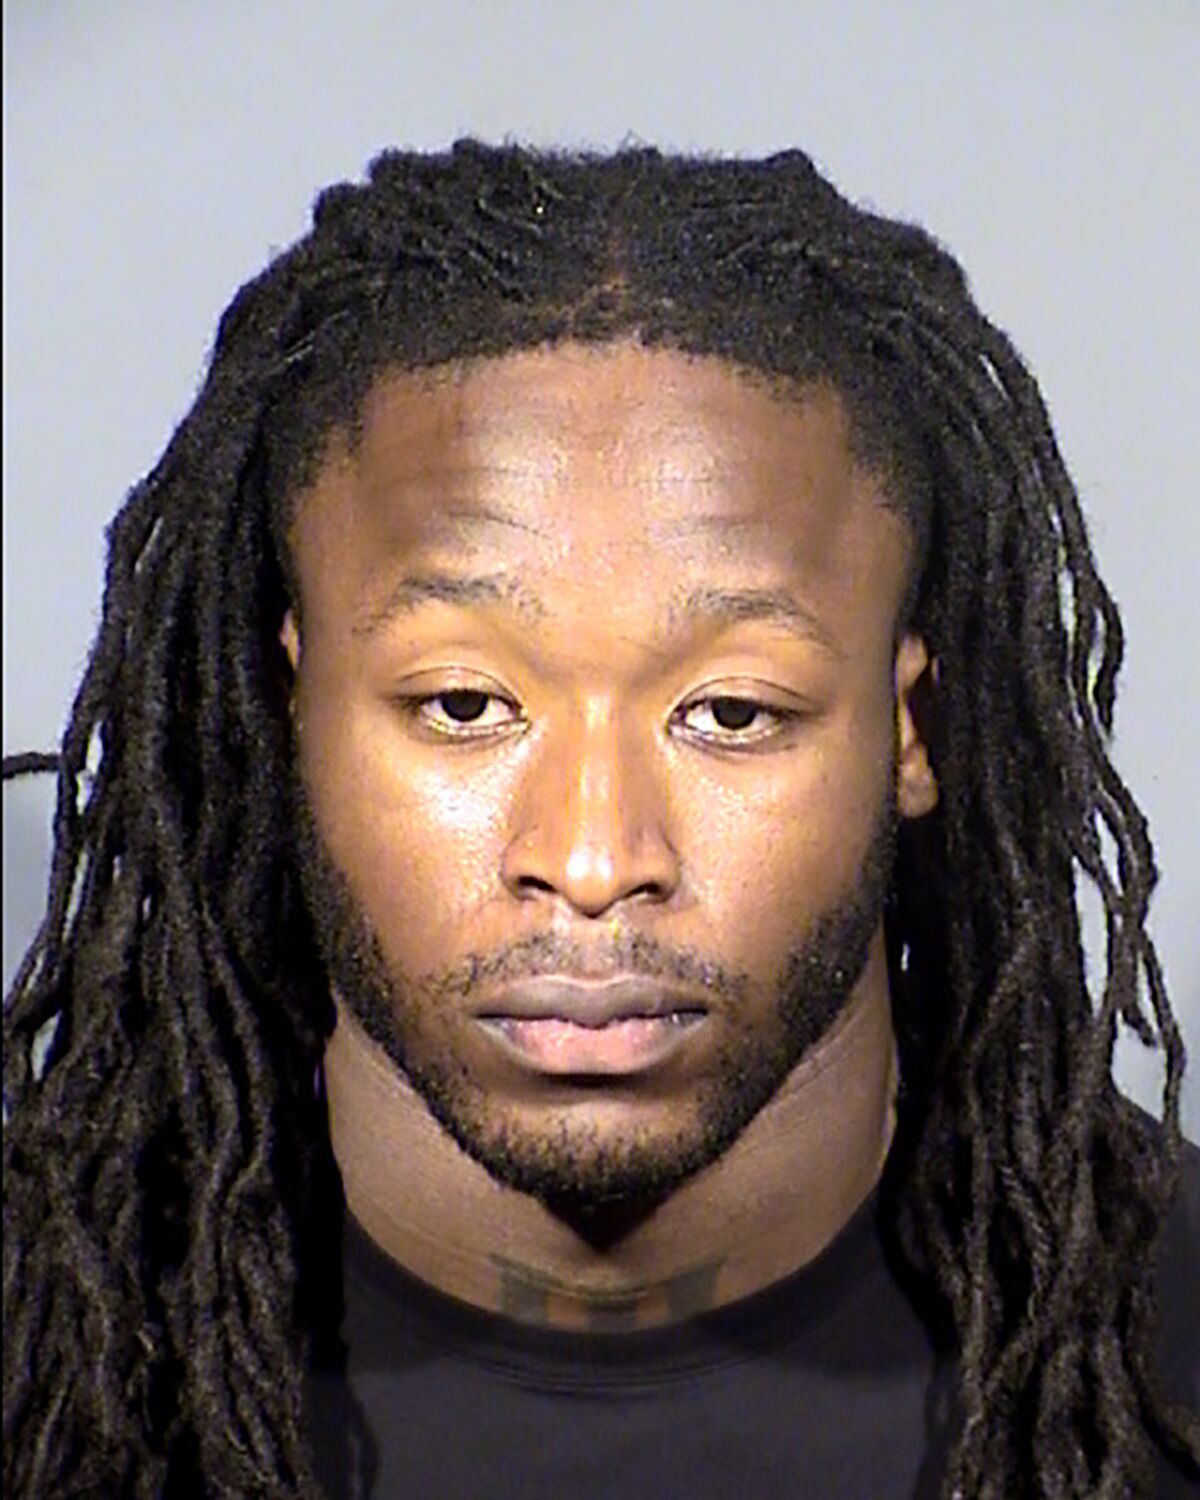 FILE - This Clark County, Nev., Detention Center booking photo shows New Orleans Saints running back Alvin Kamara following his arrest Sunday, Feb. 6, 2022, in Las Vegas on a felony battery charge. A judge in Las Vegas postponed until next month a hearing in an assault case involving two NFL players and two other men accused of severely beating a man at a Las Vegas Strip nightclub the weekend of the Pro Bowl. Kamara and Kansas City Chiefs cornerback Chris Lammons and two other defendants, Darrin Young and Percy Harris, didn't have to appear in person in court on Tuesday March 8, 2022. (Clark County Detention via AP,File)